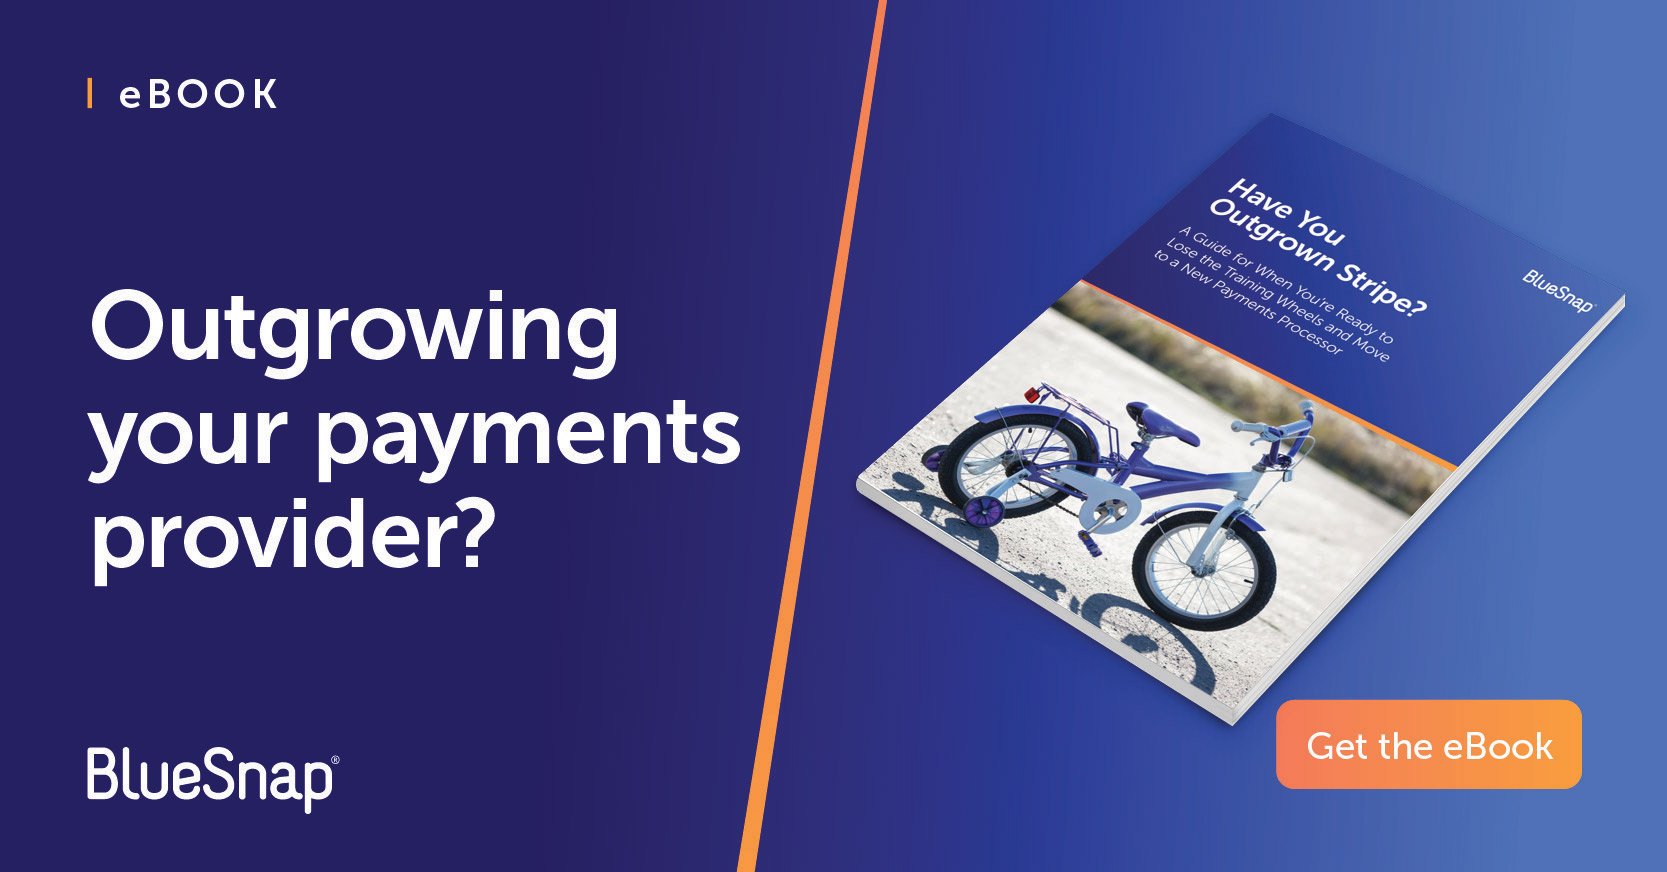 Have you outgrown your payments provider? Get the ebook